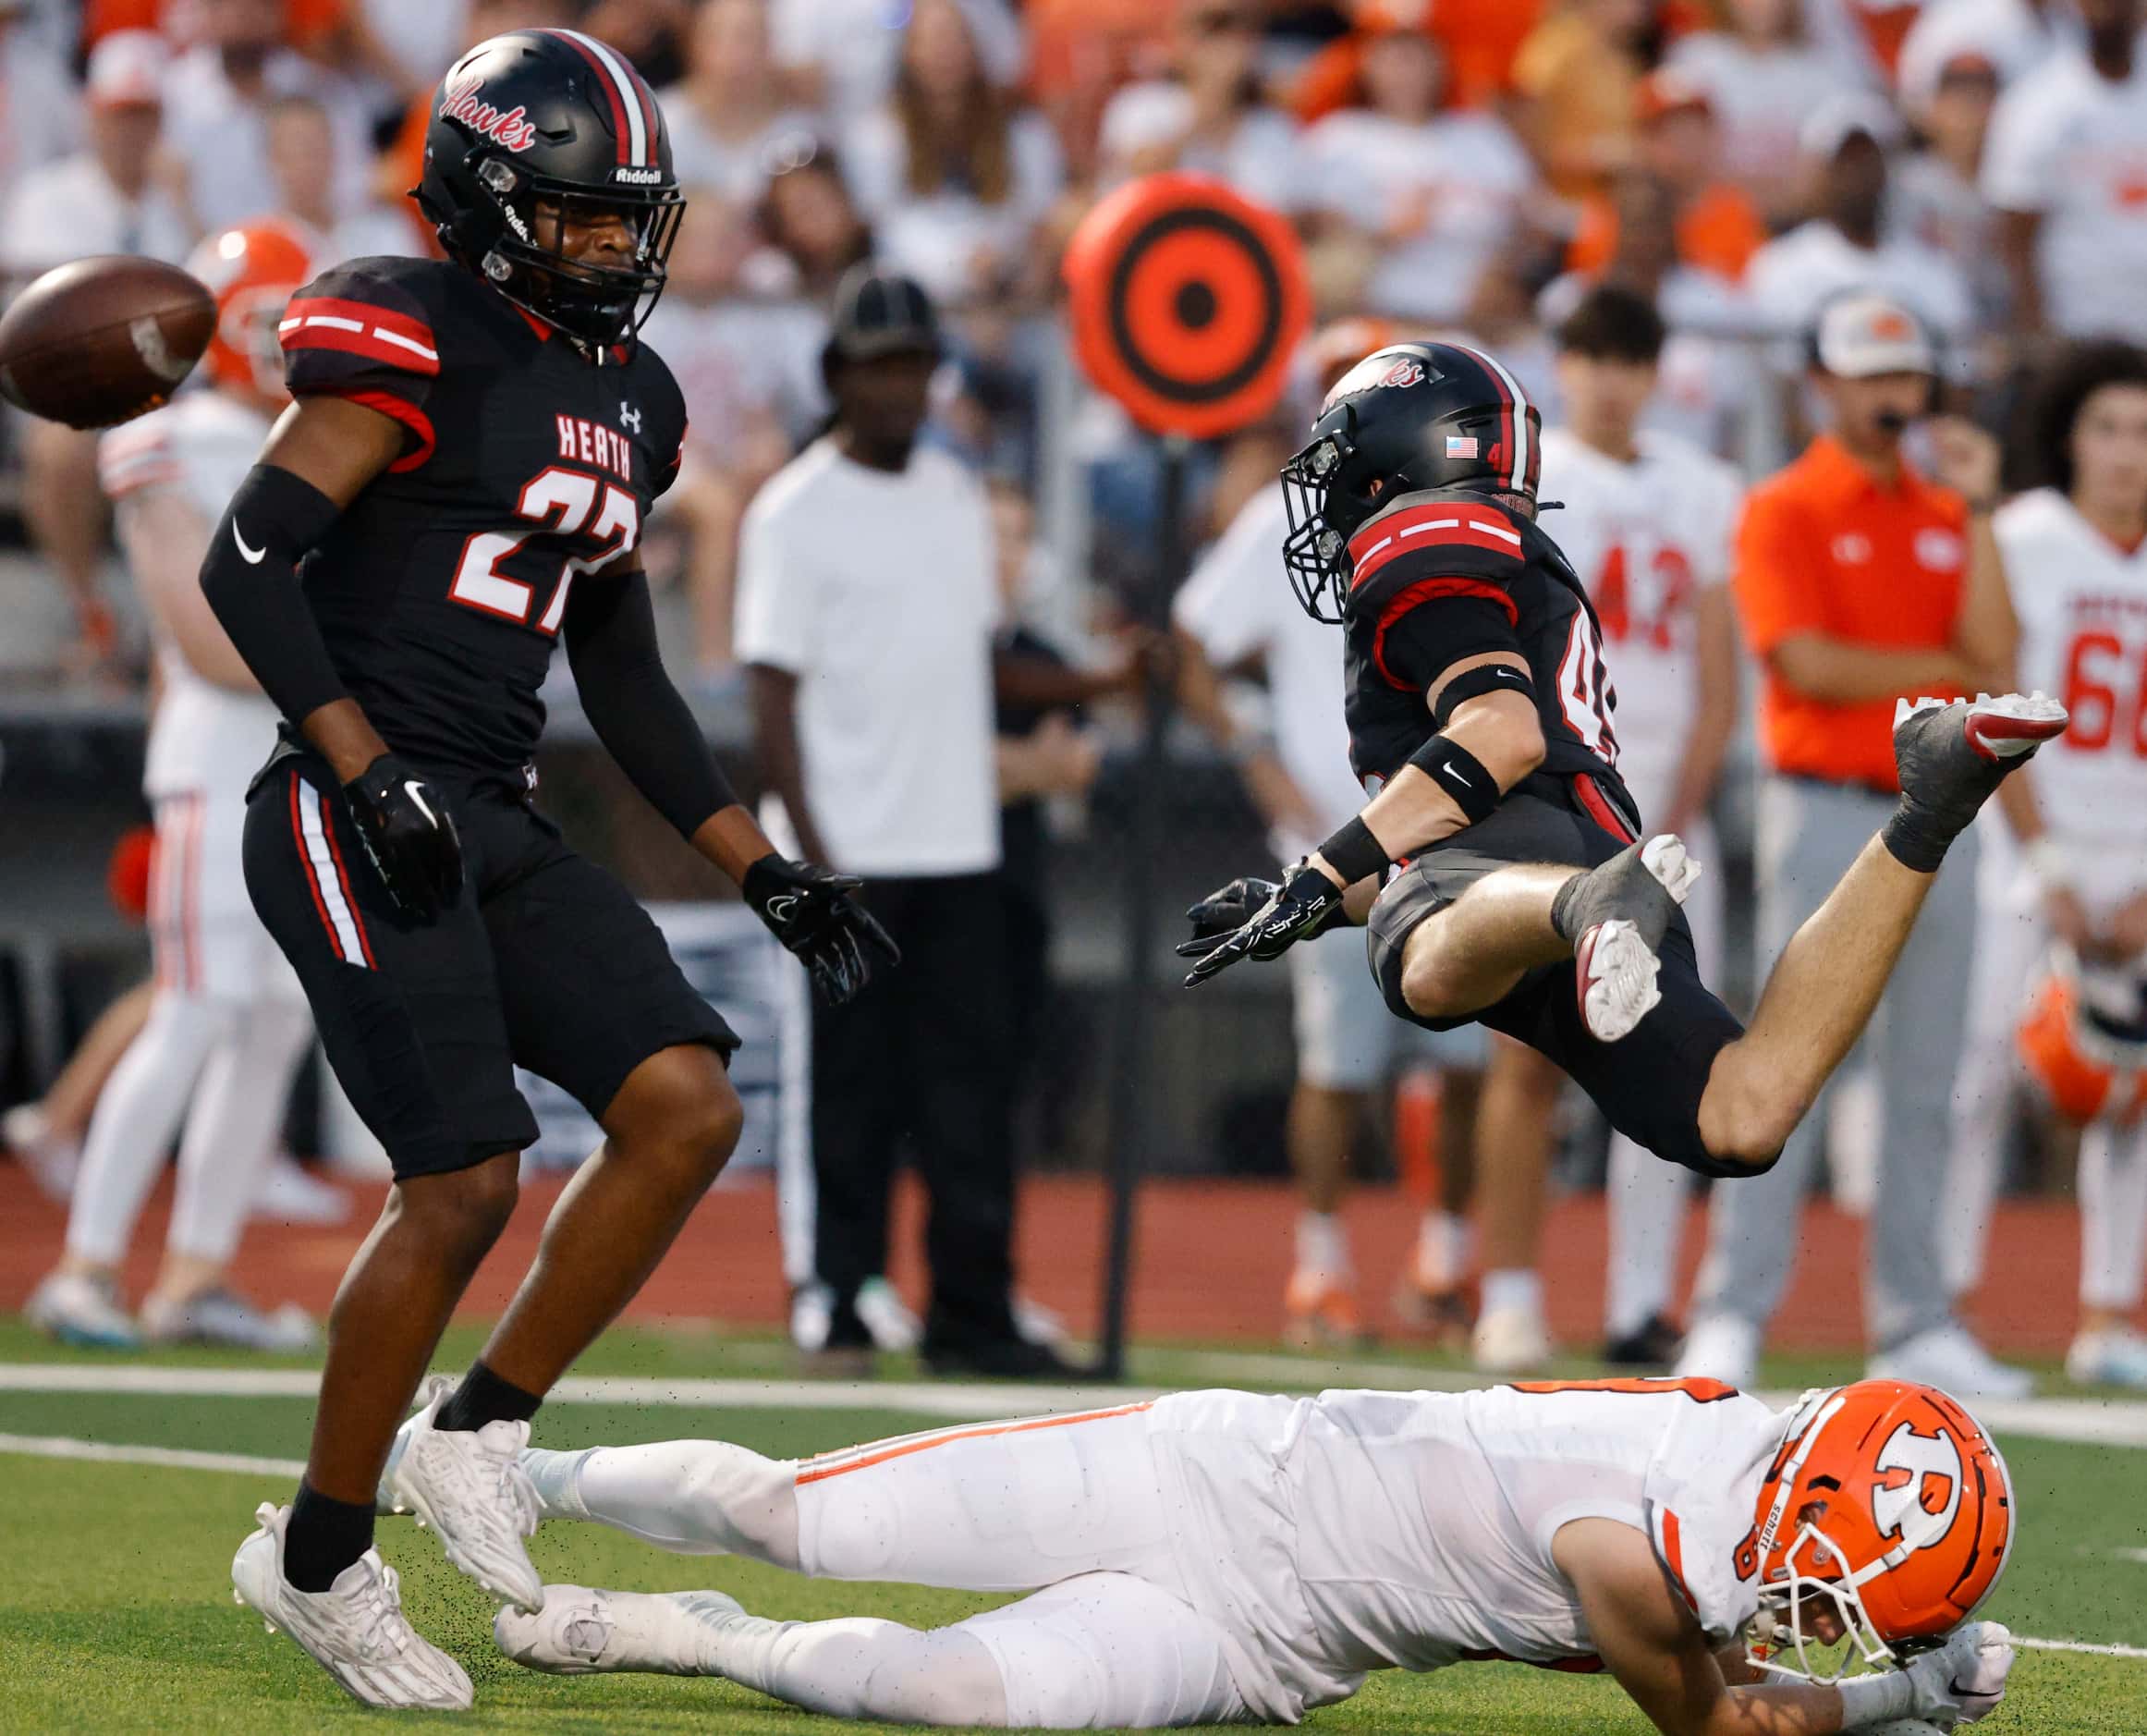 Rockwall's Tristan Gooch (8), down, fails to make the catch against Rockwall-Heath's Chase...